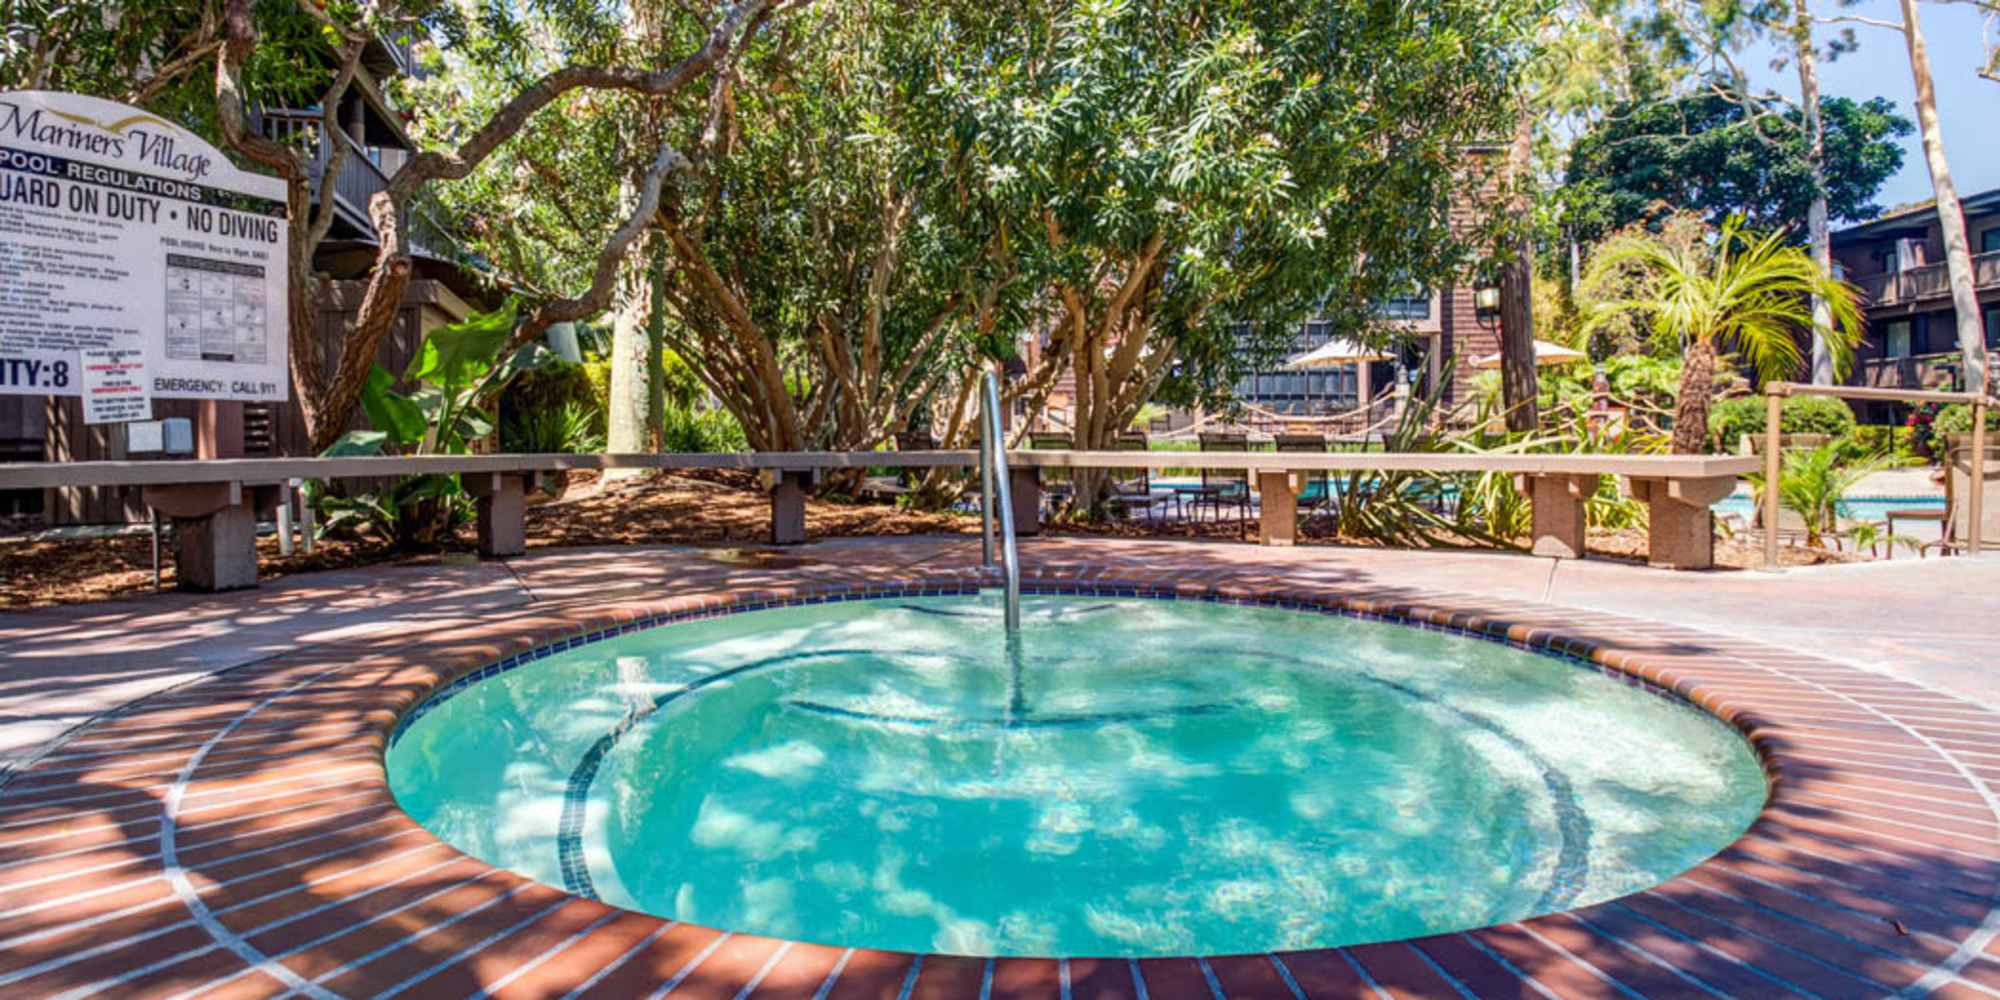 Outdoor spa surrounded by mature trees at Mariners Village in Marina del Rey, California